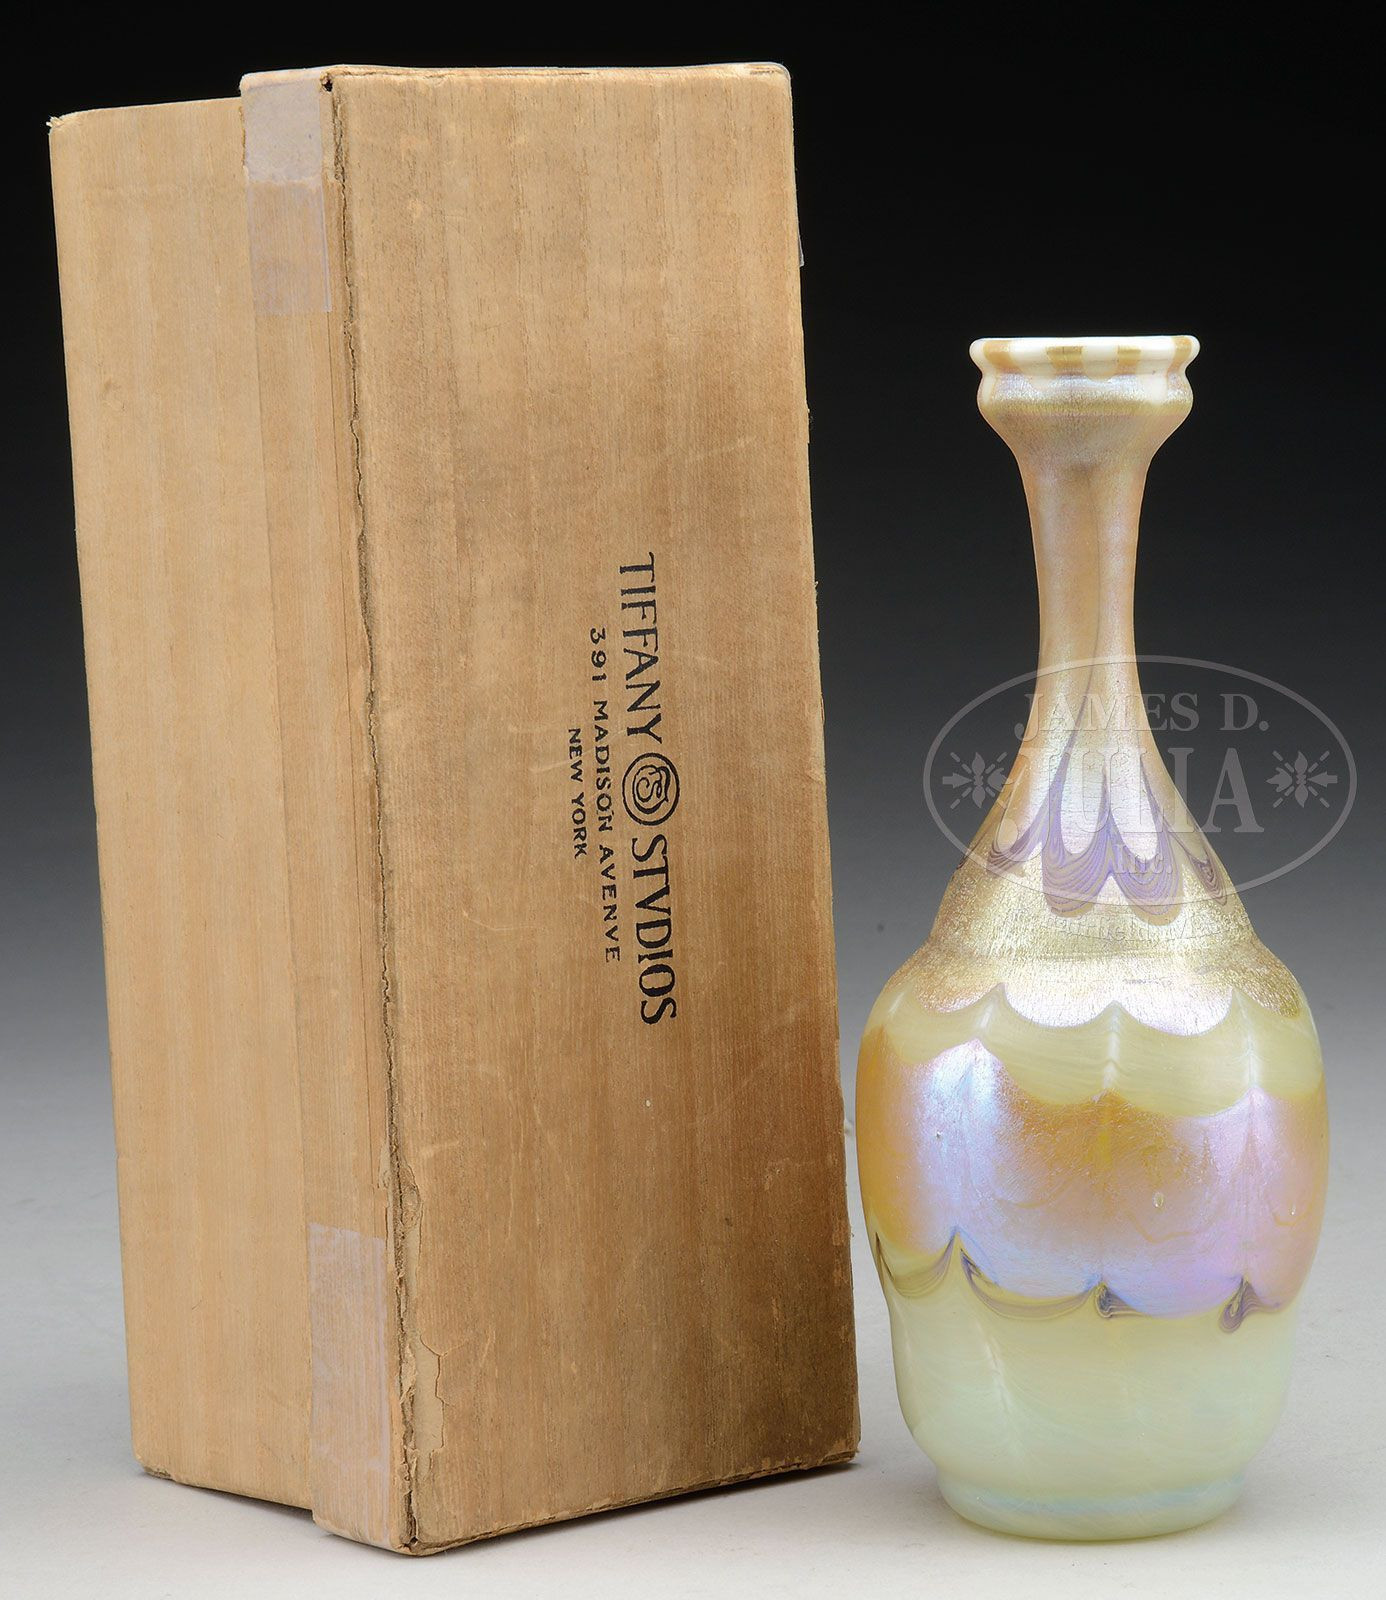 milk bottle vases wholesale of 35 antique green glass vases the weekly world with regard to 31 new glass bottle vase